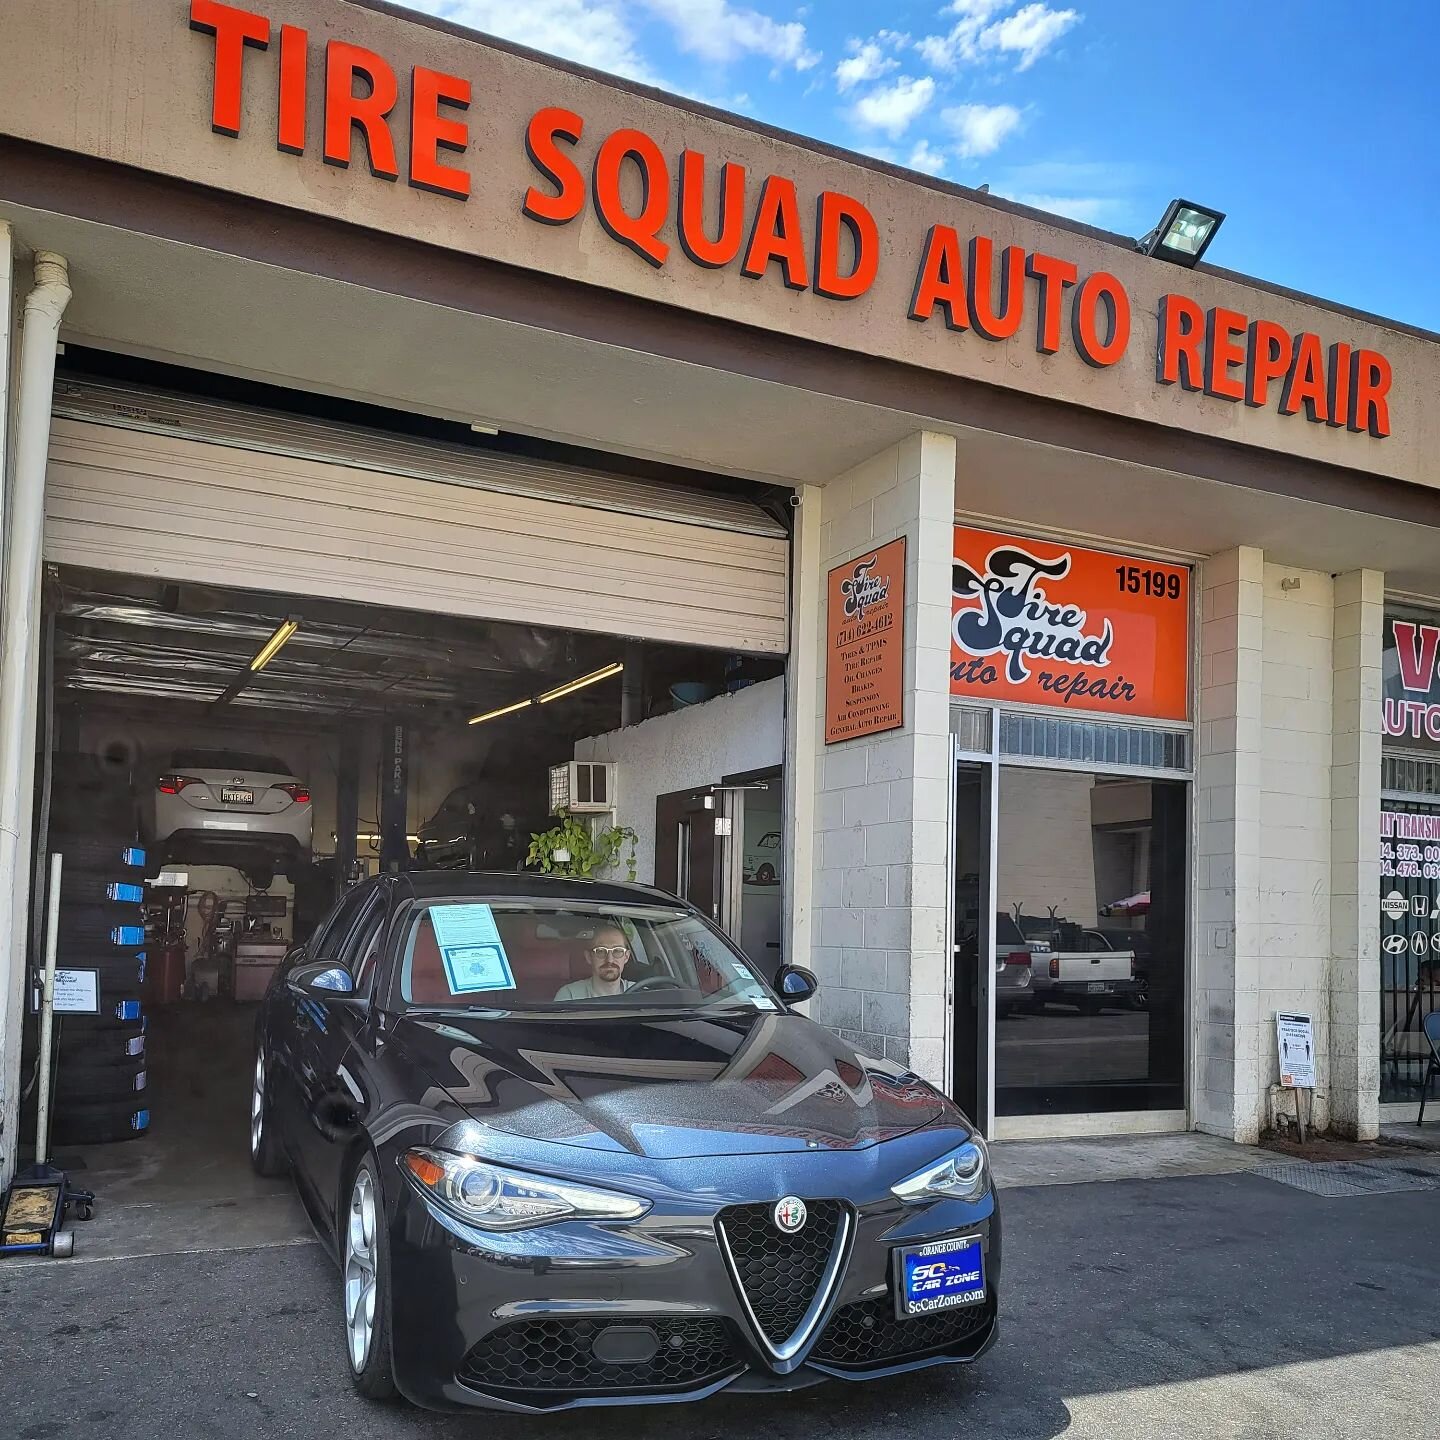 One of our good customers brought in a car for a thorough pre-purchase inspection! If you're gonna spend the dough on a pre-owned car, it doesn't hurt to get it checked out beforehand for some peace of mind! 
.
.
.
#tiresquad #tiresquadwestminster #t